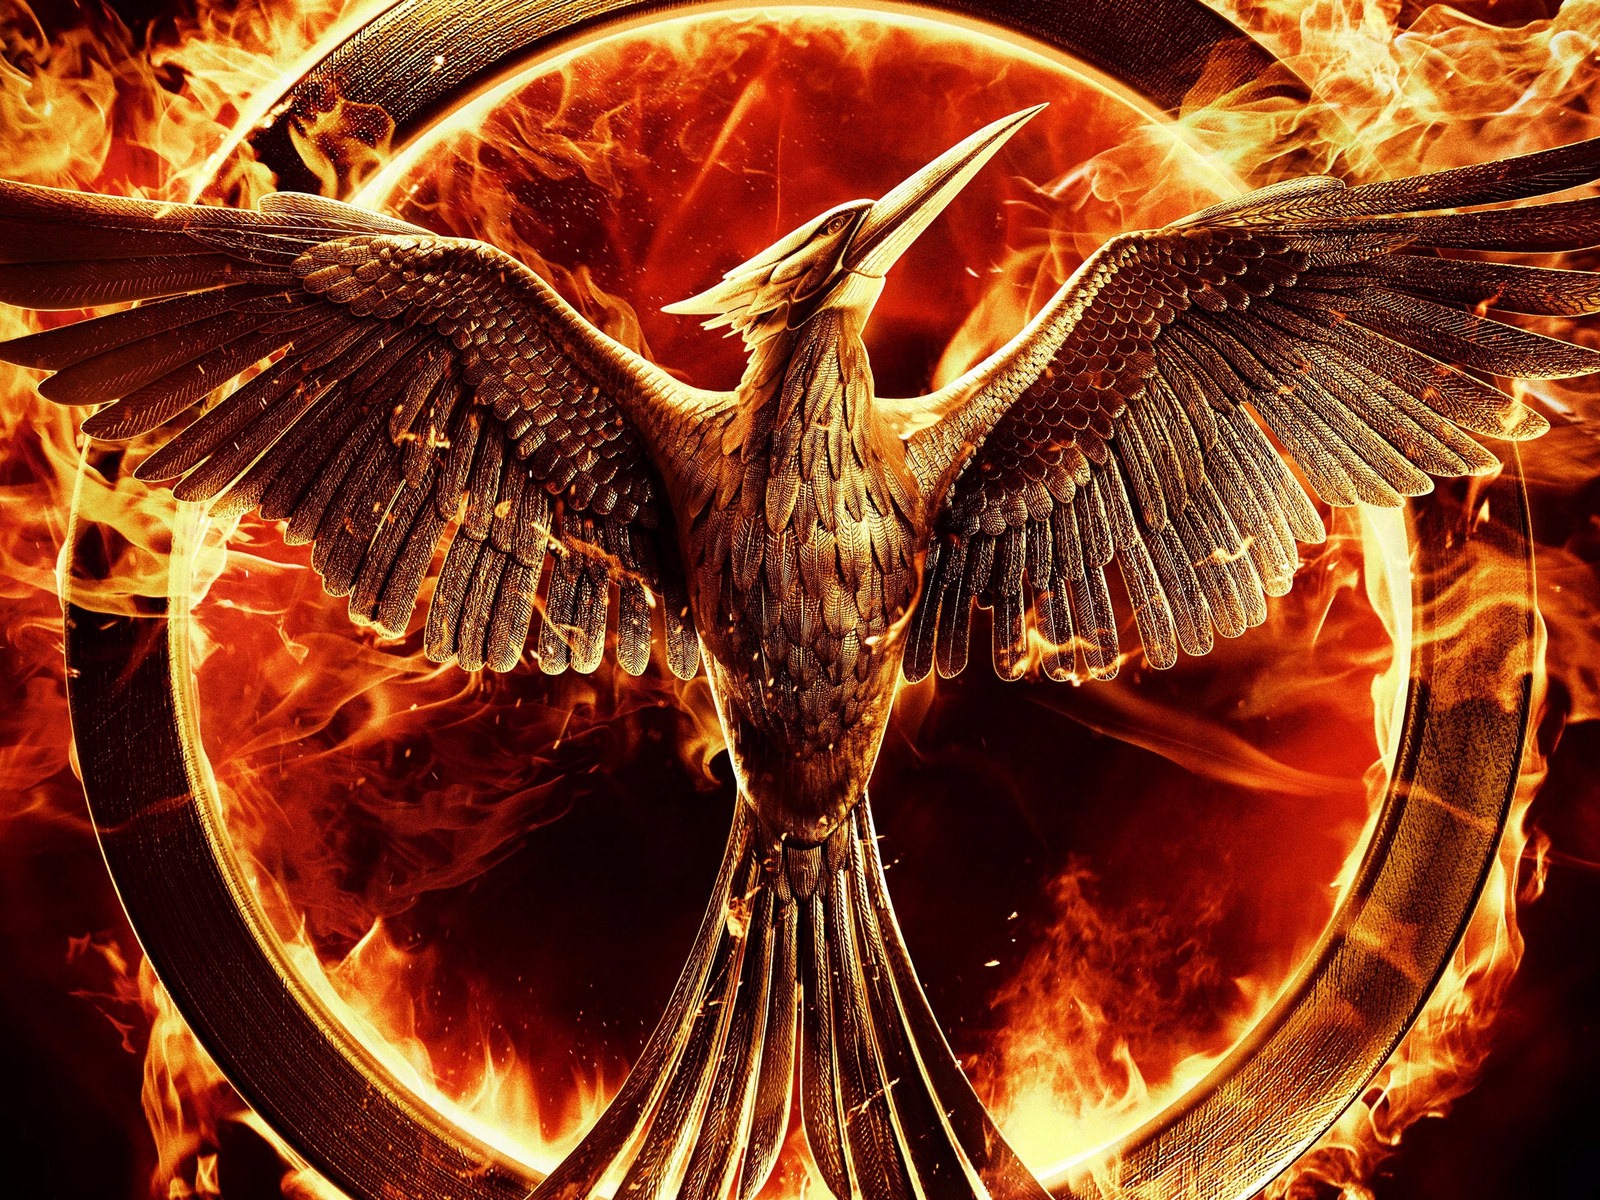 The Hunger Games: Mockingjay HD wallpapers #4 - 1600x1200